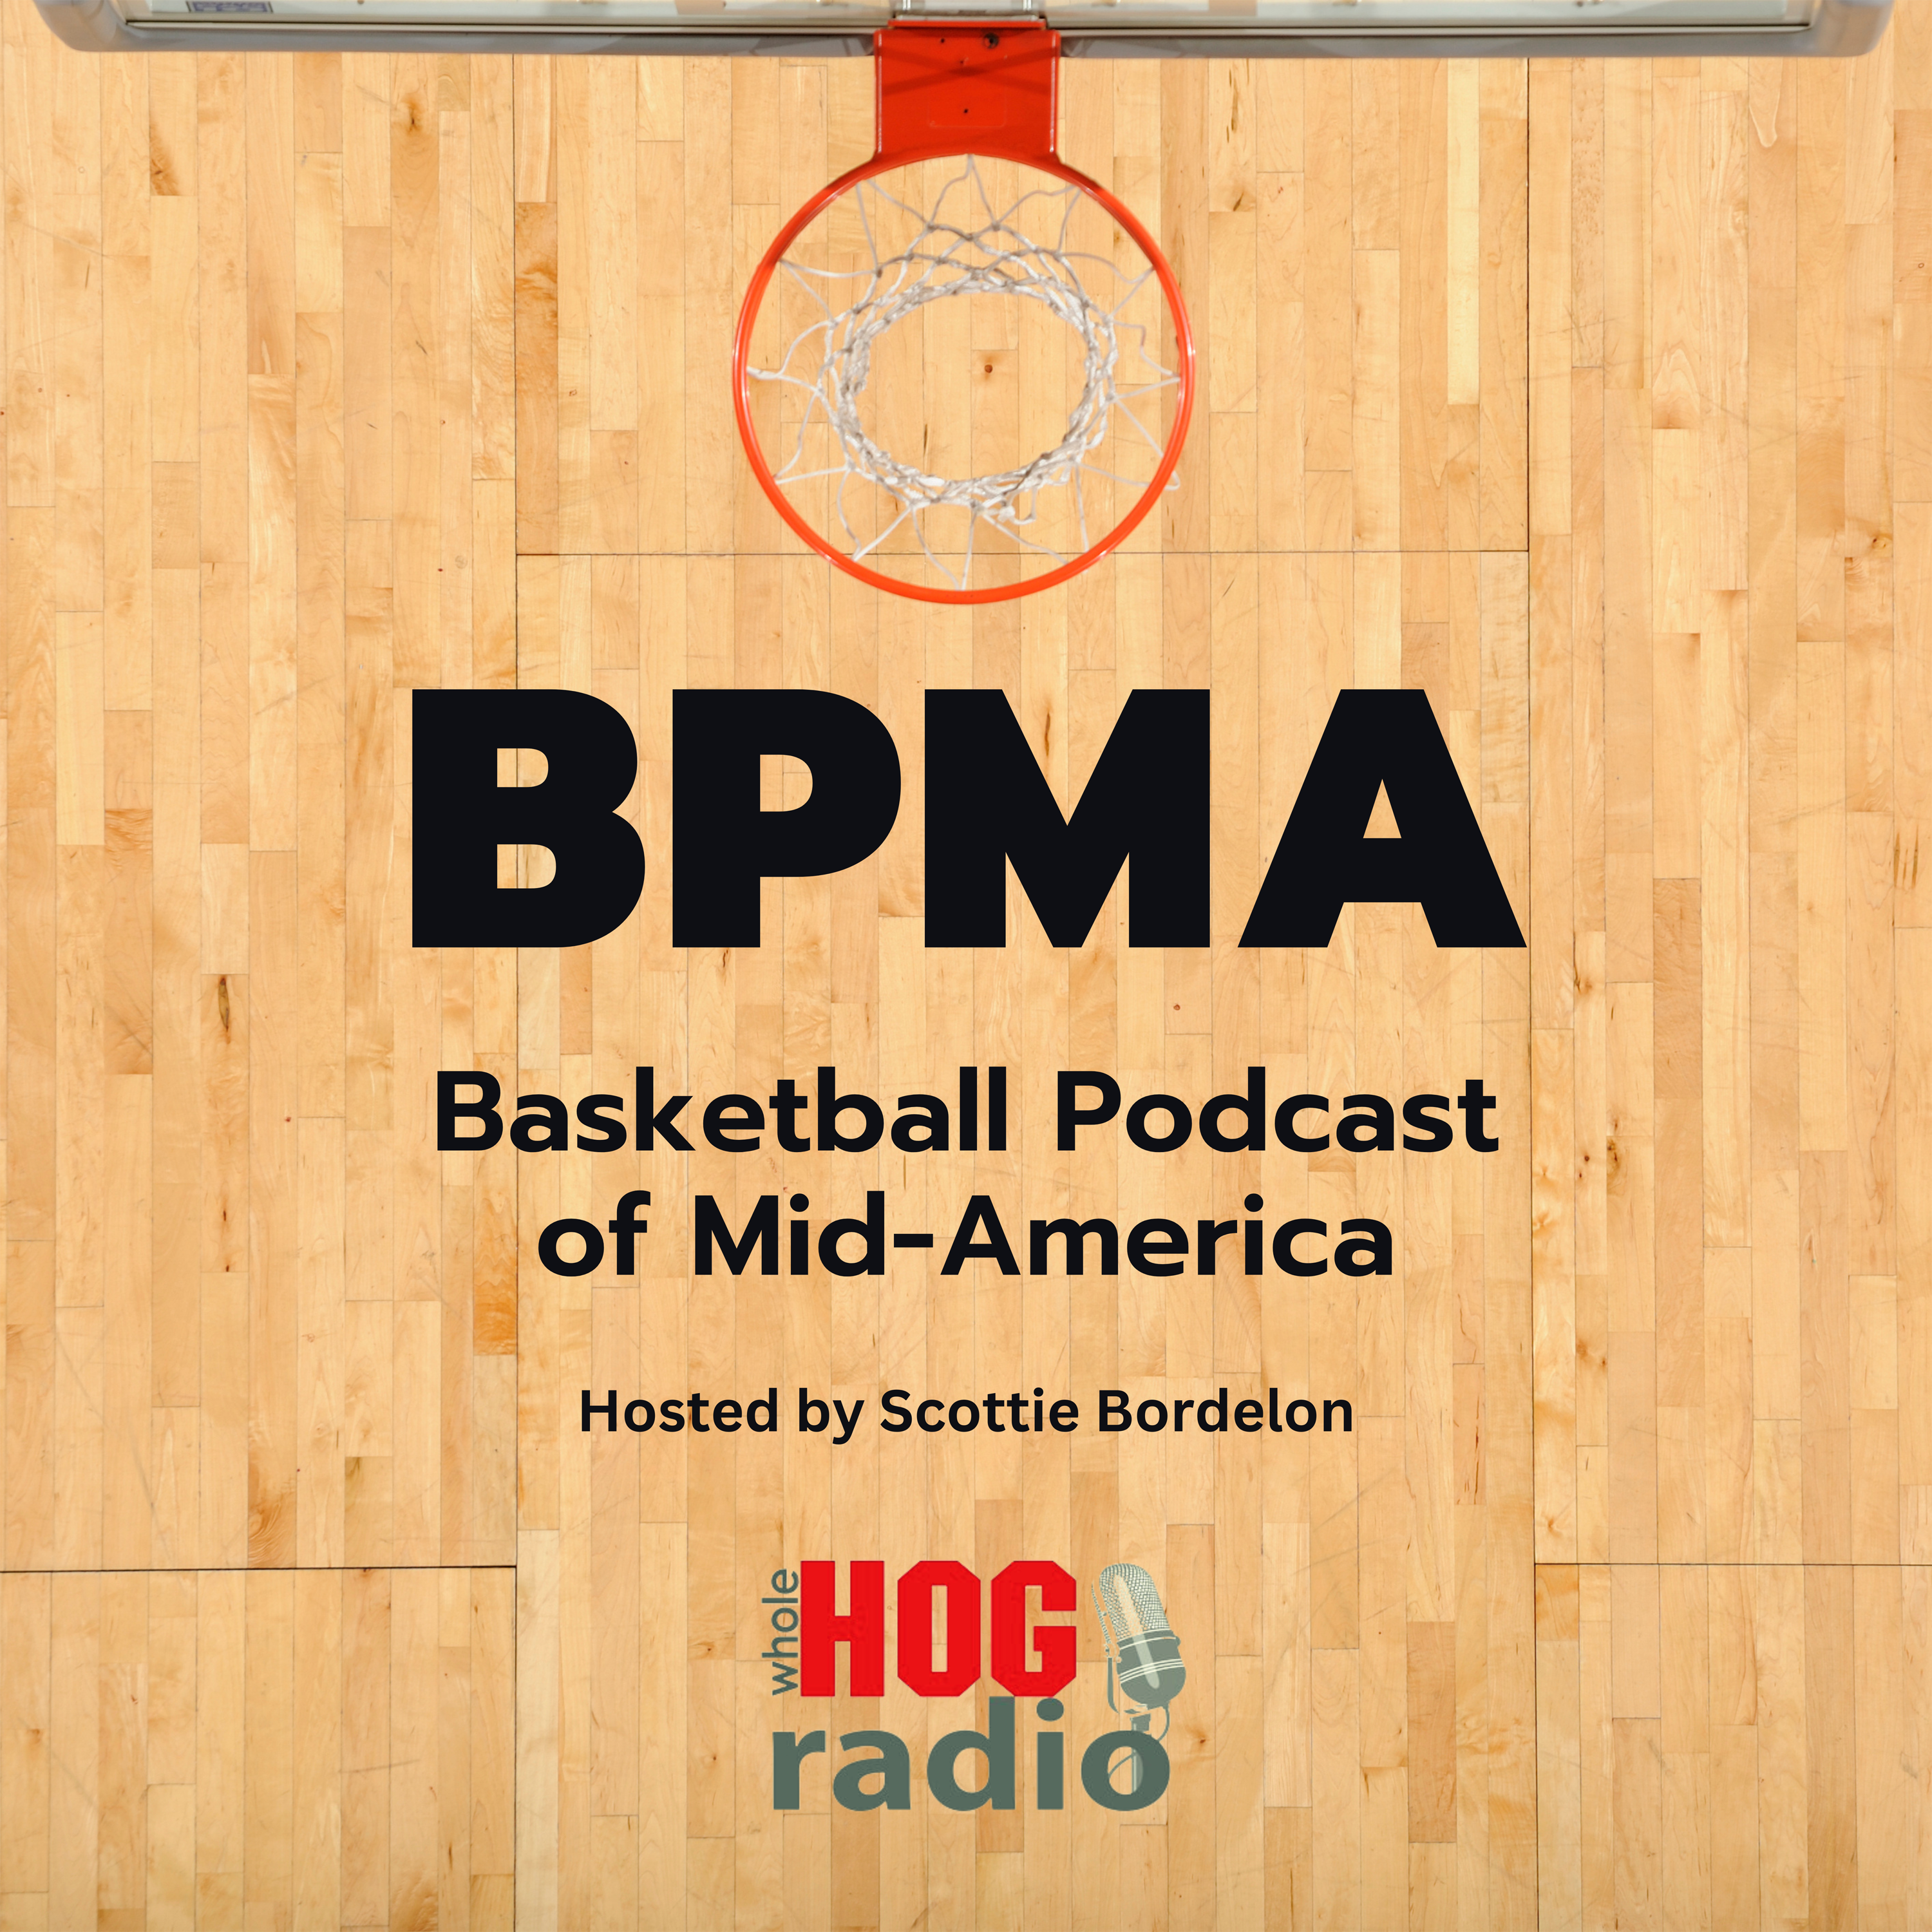 Basketball Podcast of Mid-America: Some Things to Talk About